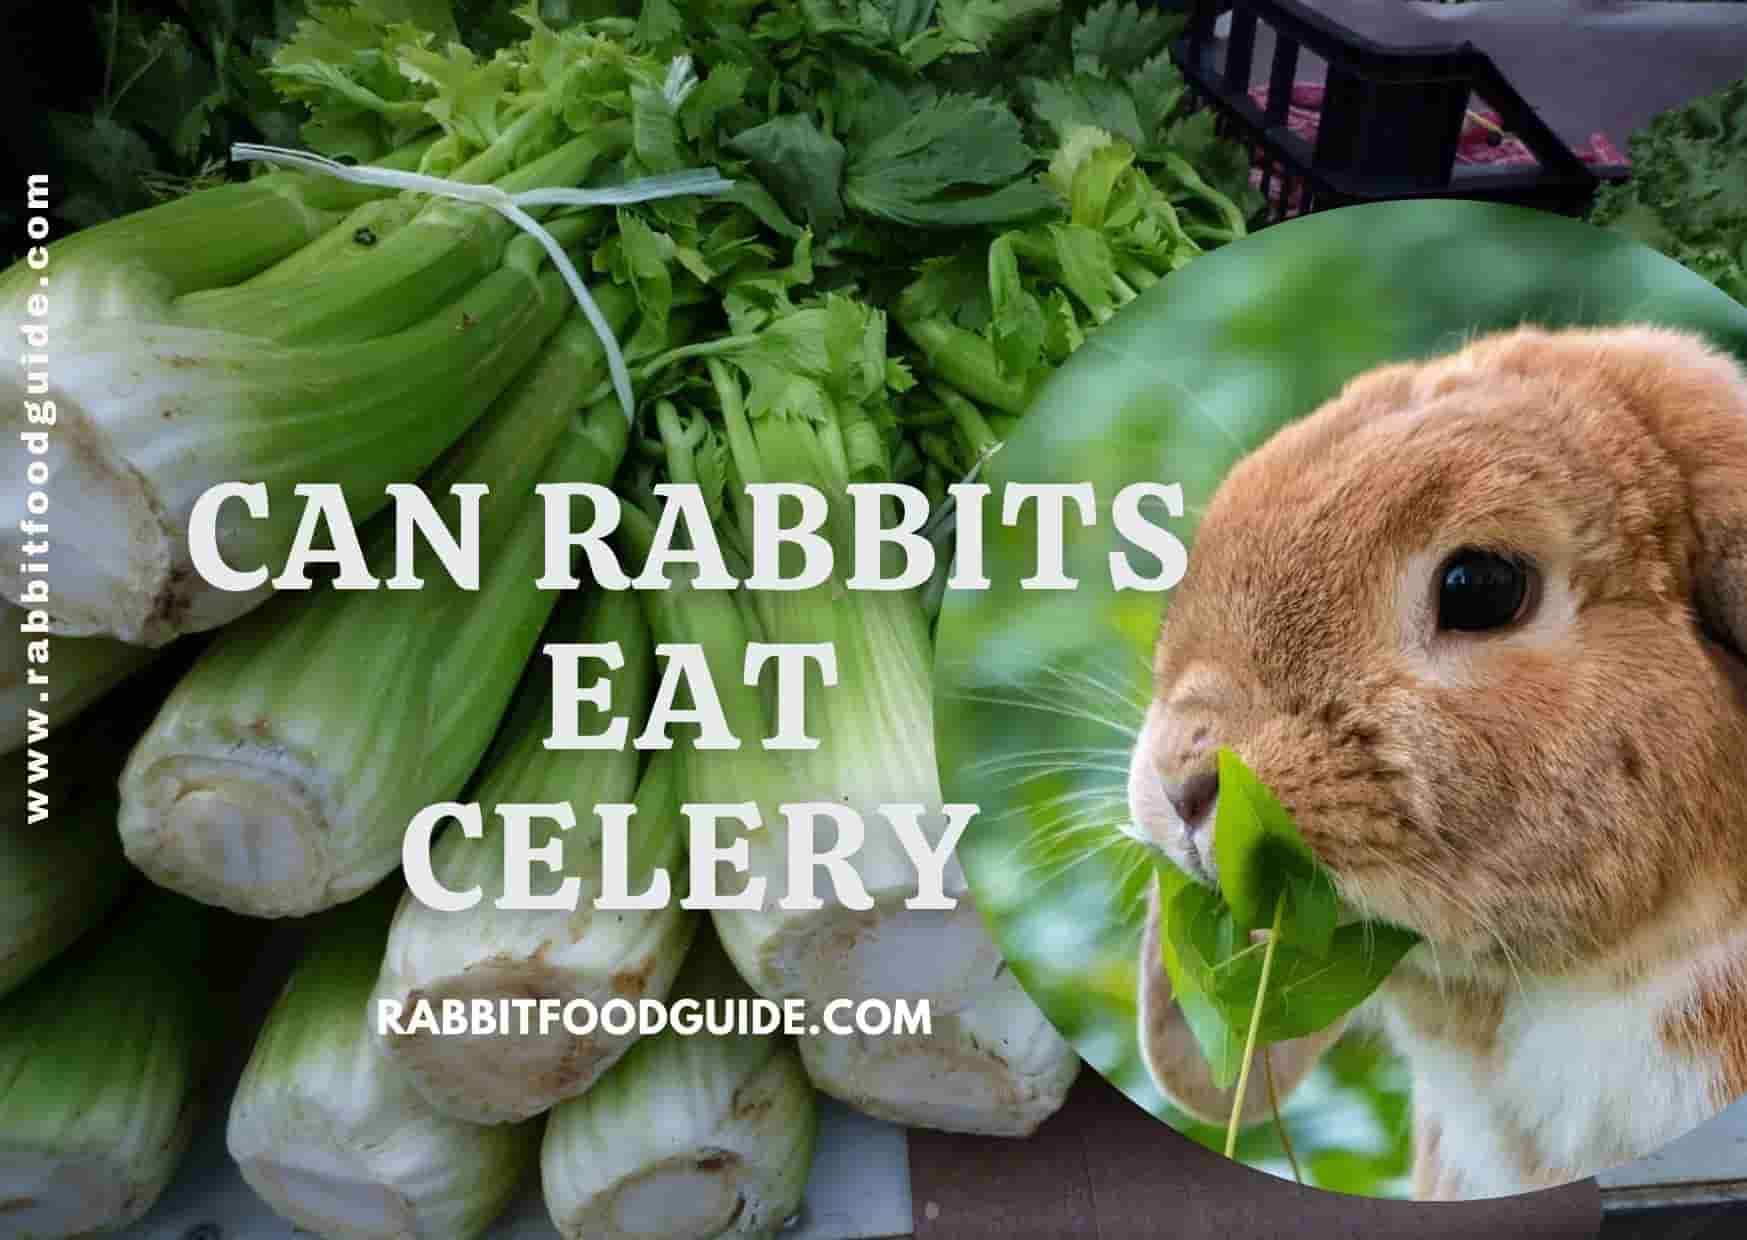 can rabbits eat celery?